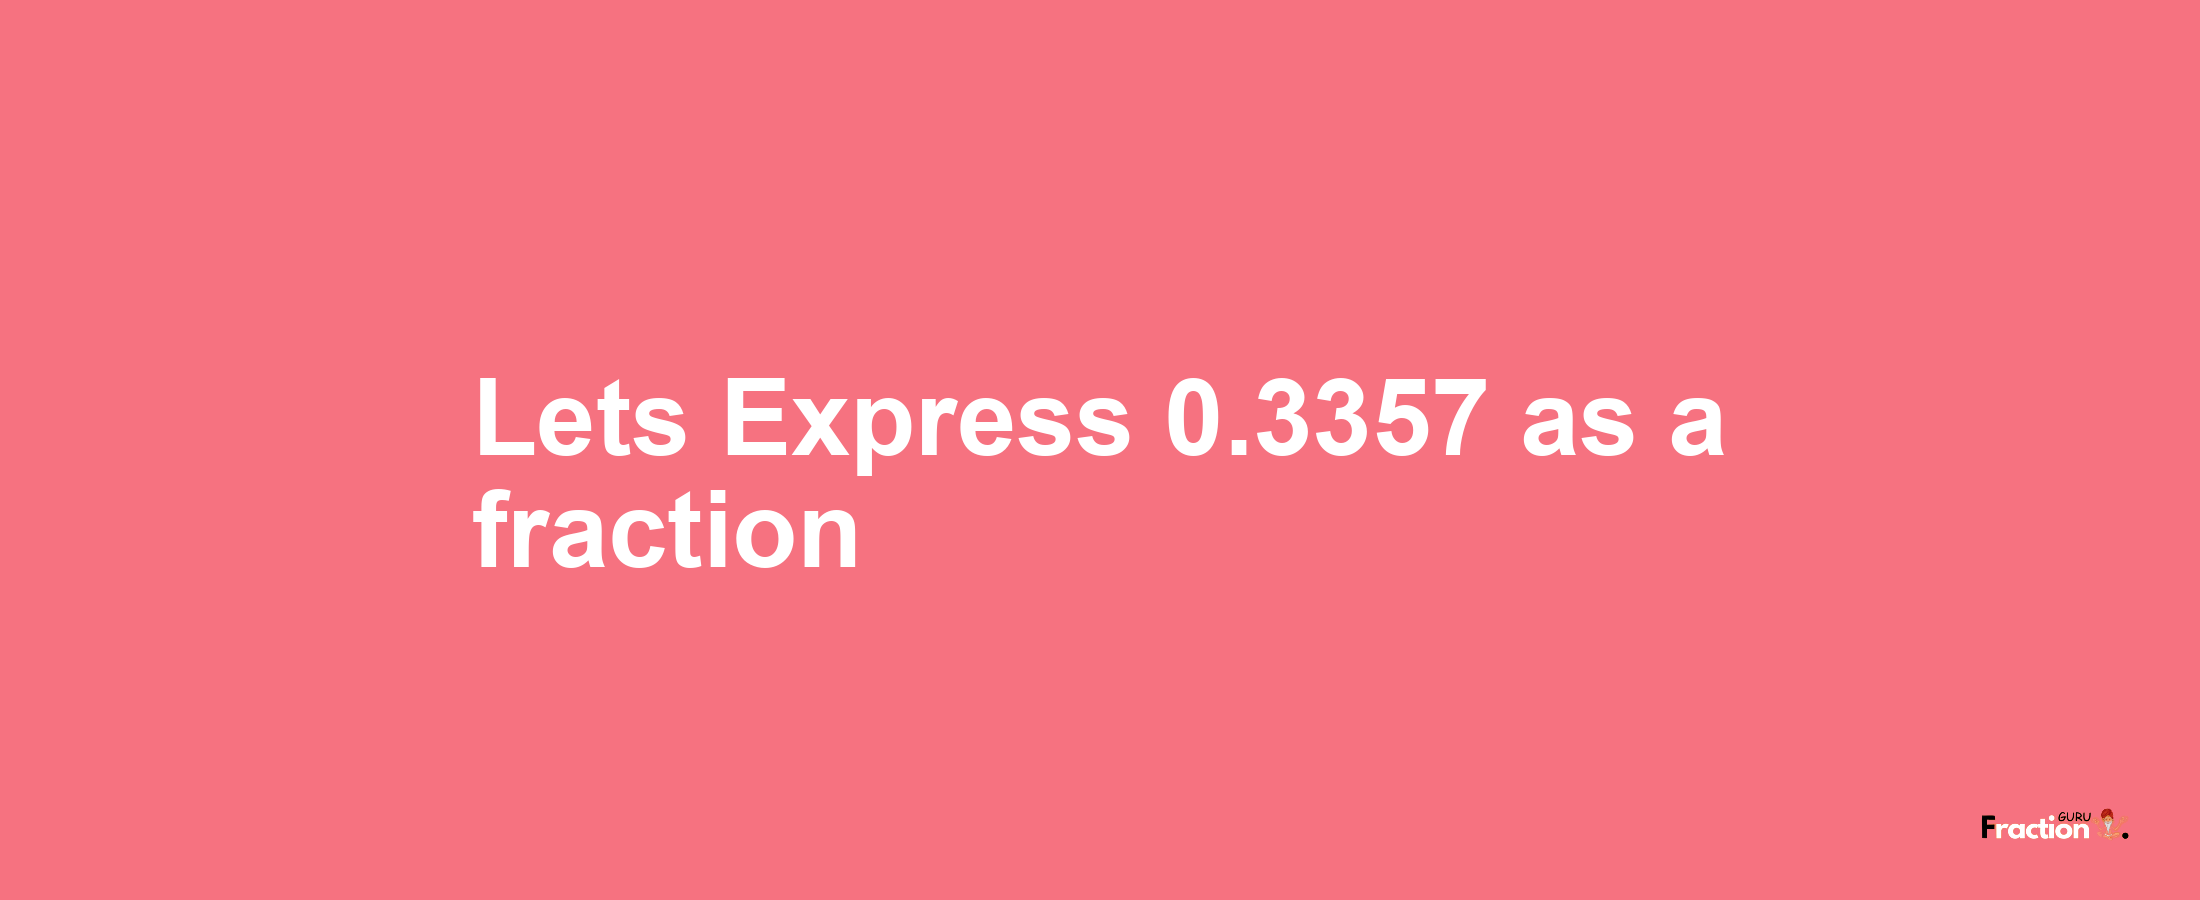 Lets Express 0.3357 as afraction